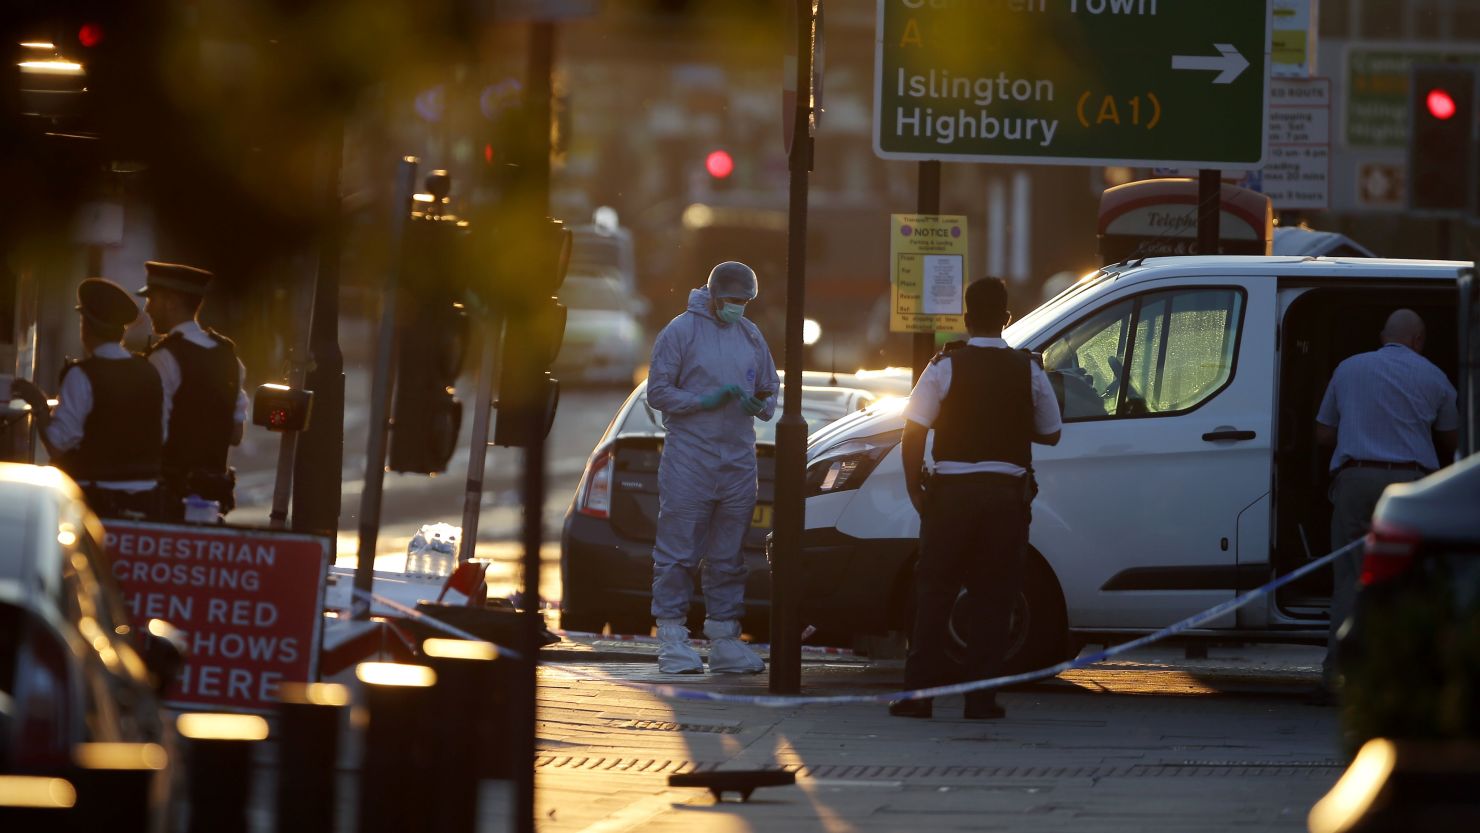 Forensic investigators at the scene of the incident in Finsbury Park, north London, on June 19.